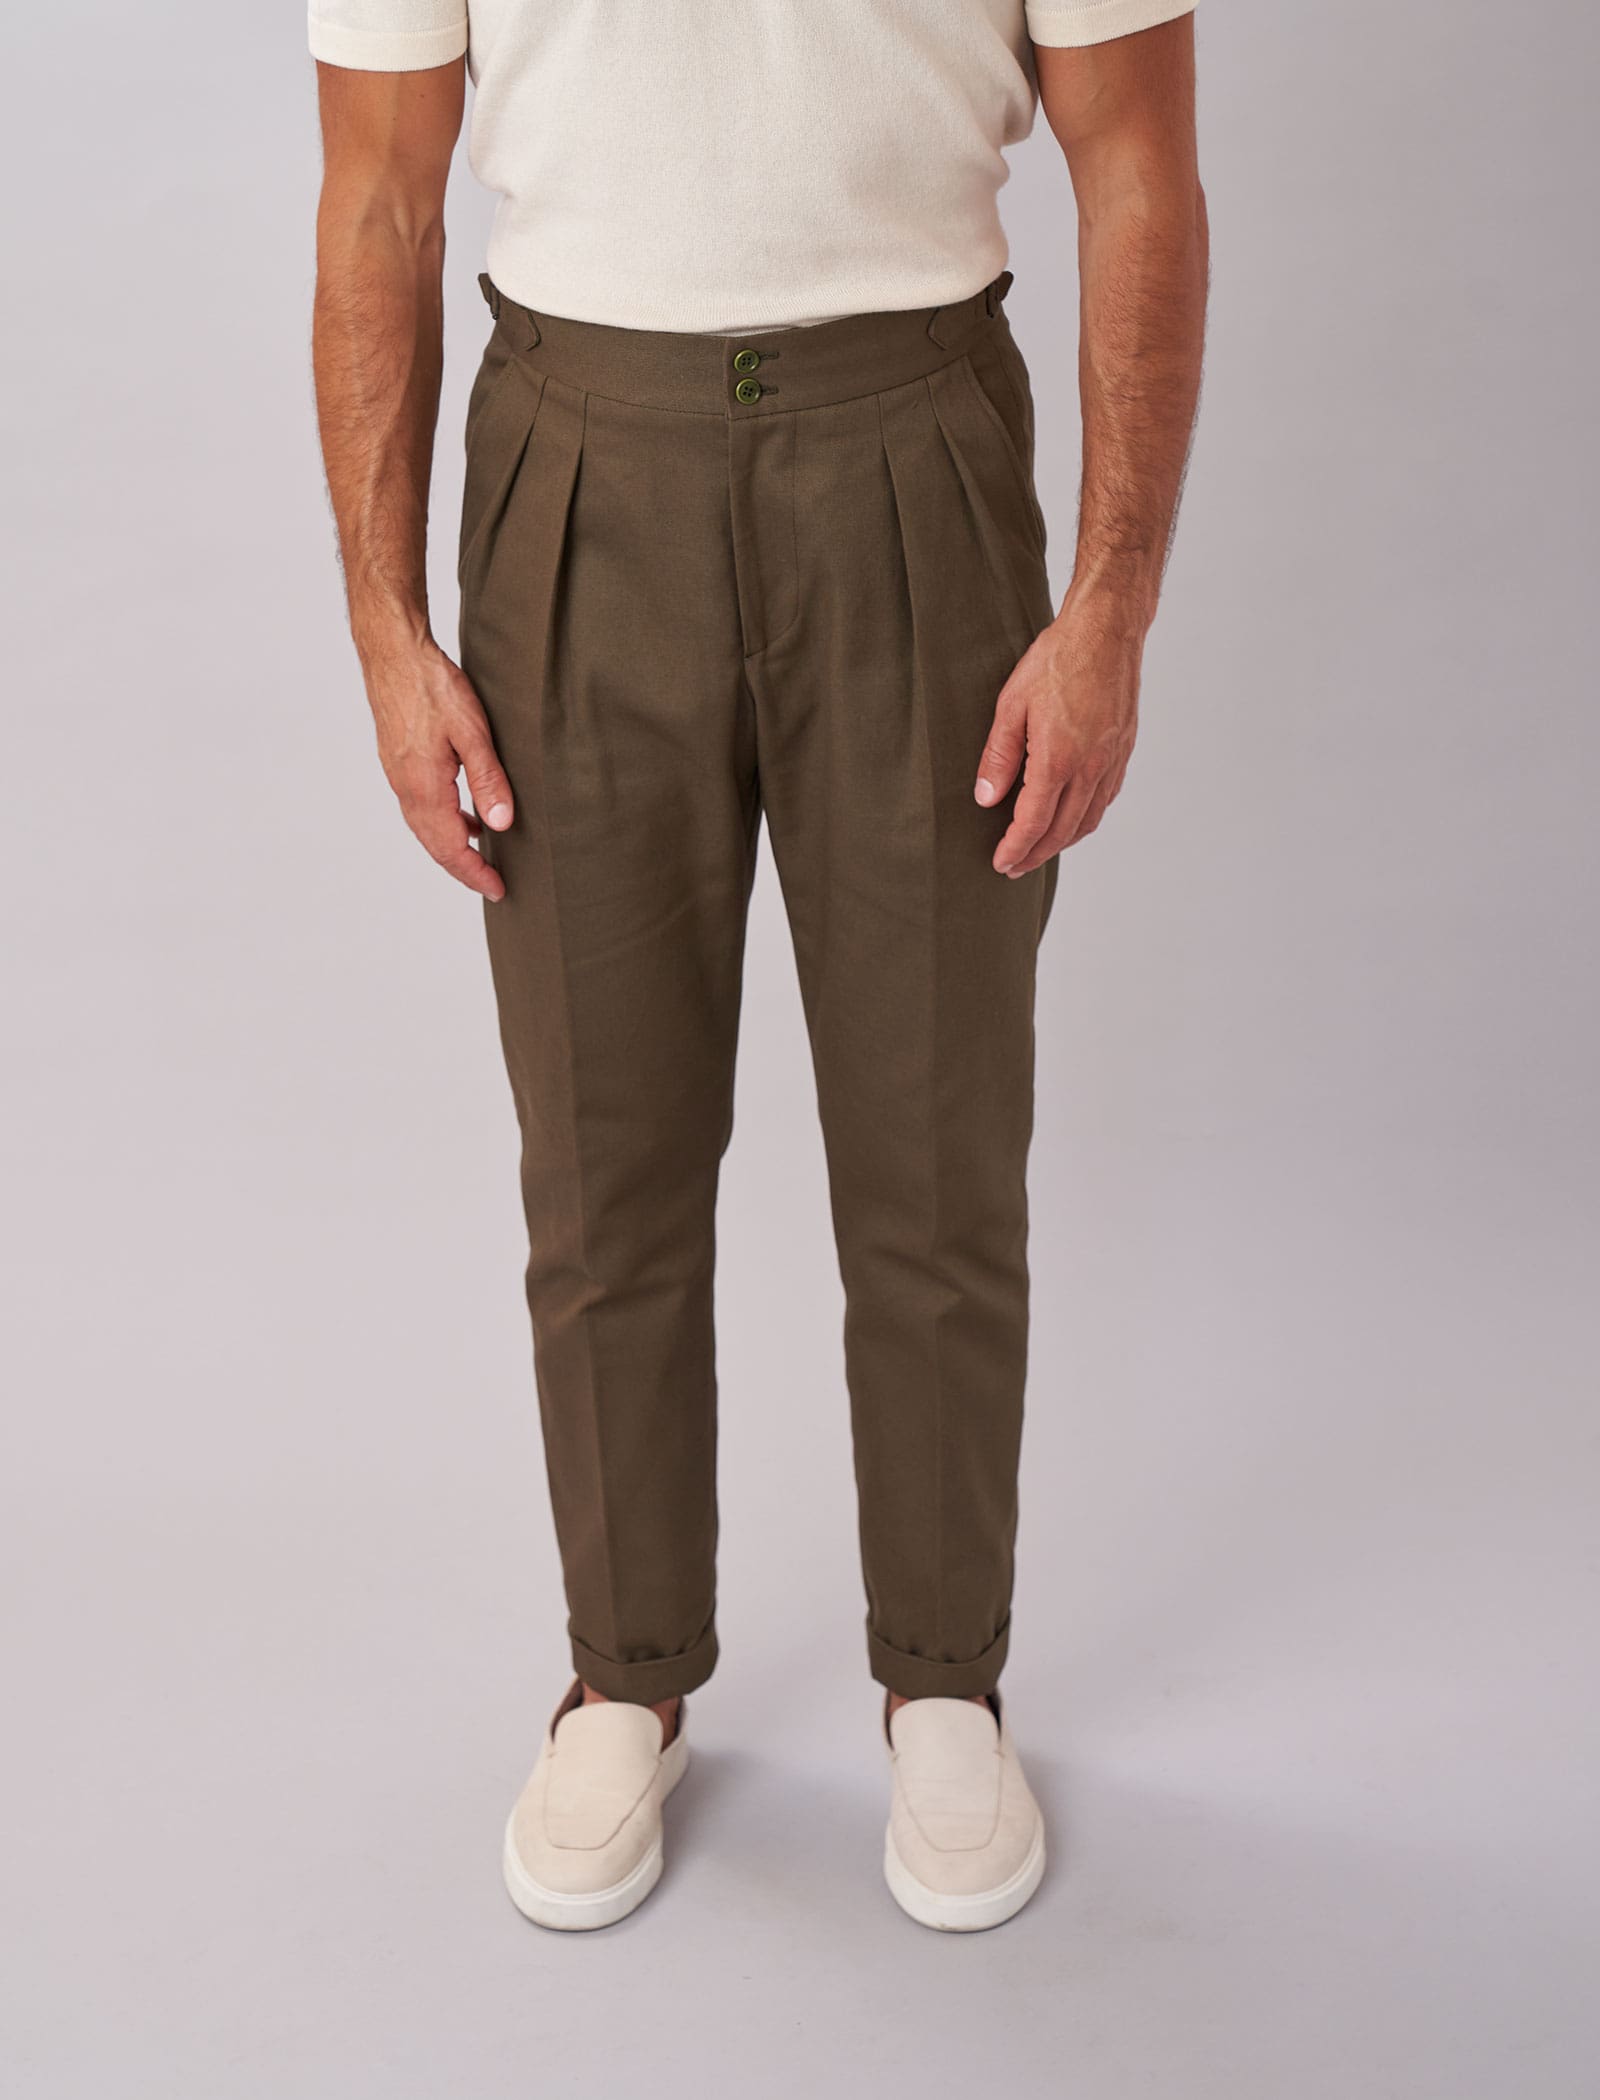 Men's Dark Olive Green Cavalry Twill Cotton High Waisted Trousers - 40  Colori